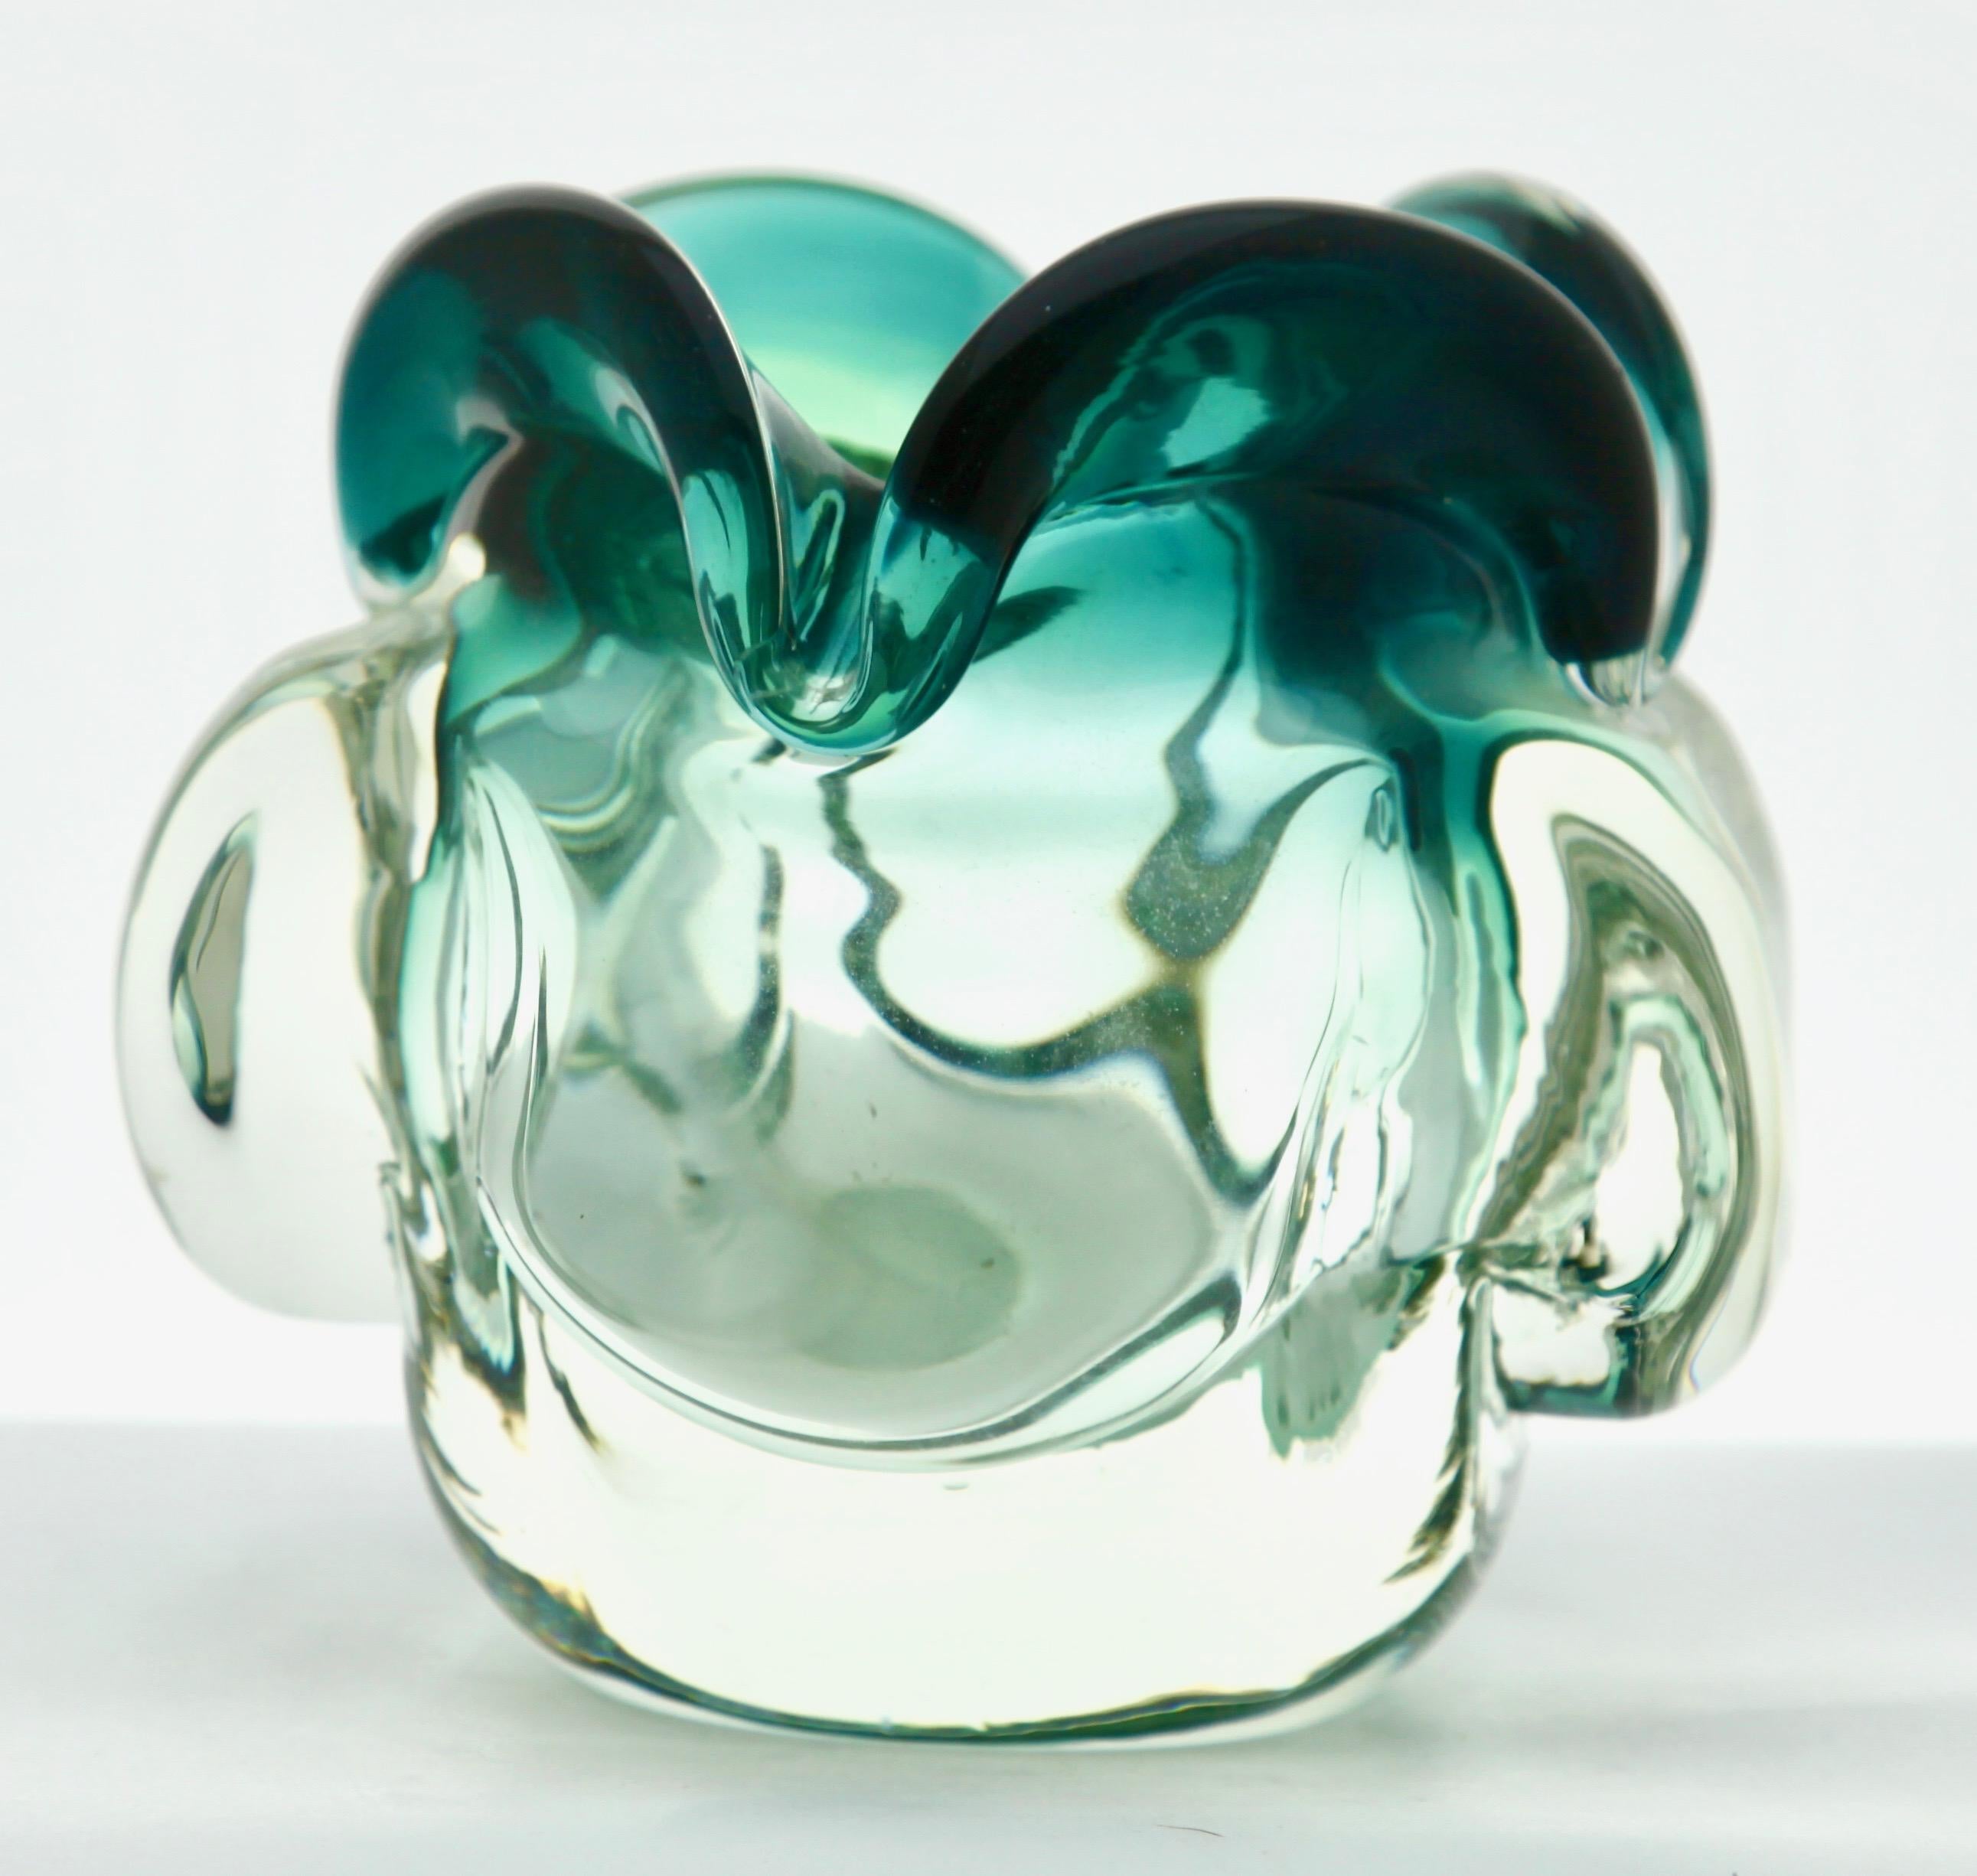 Hand-Crafted Solid Crystal Biomorphic Bowl with Waves of Green and Sommerso